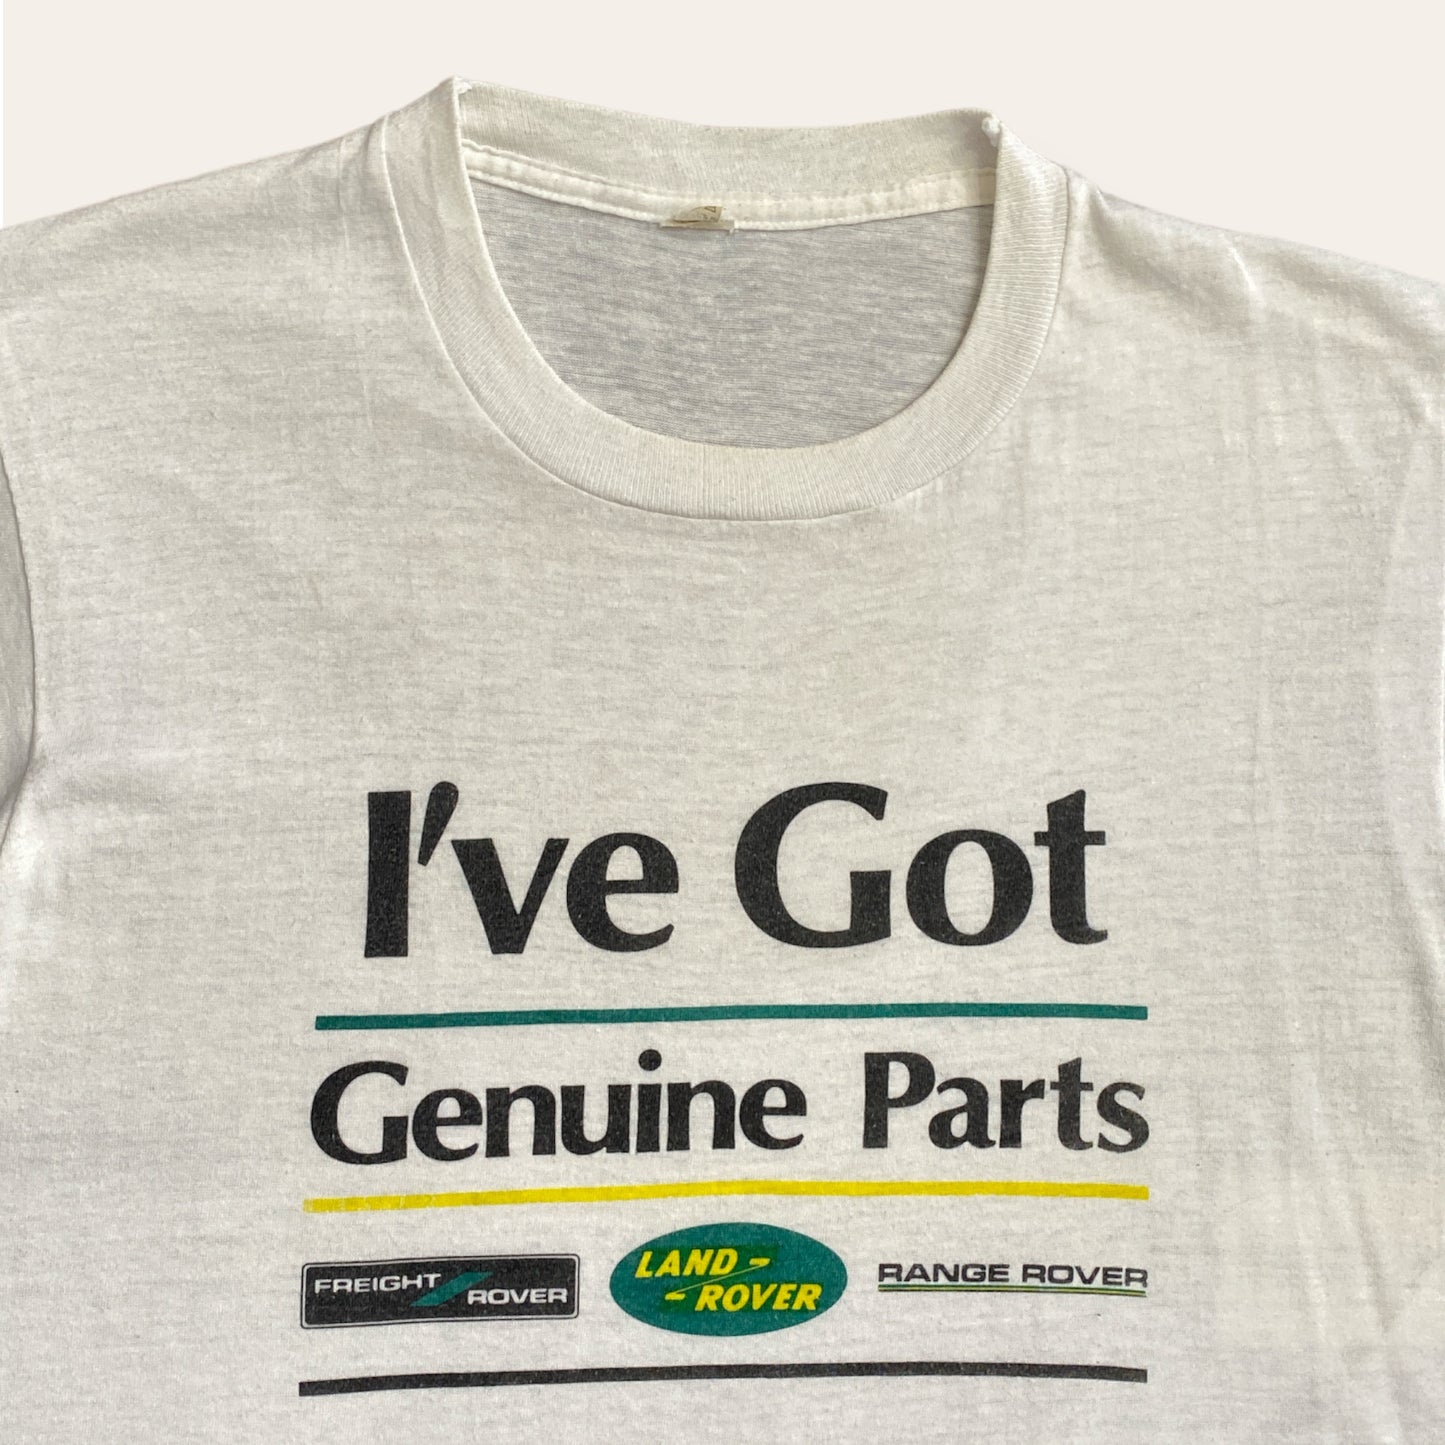 90s Land Rover Genuine Parts Tee Size L